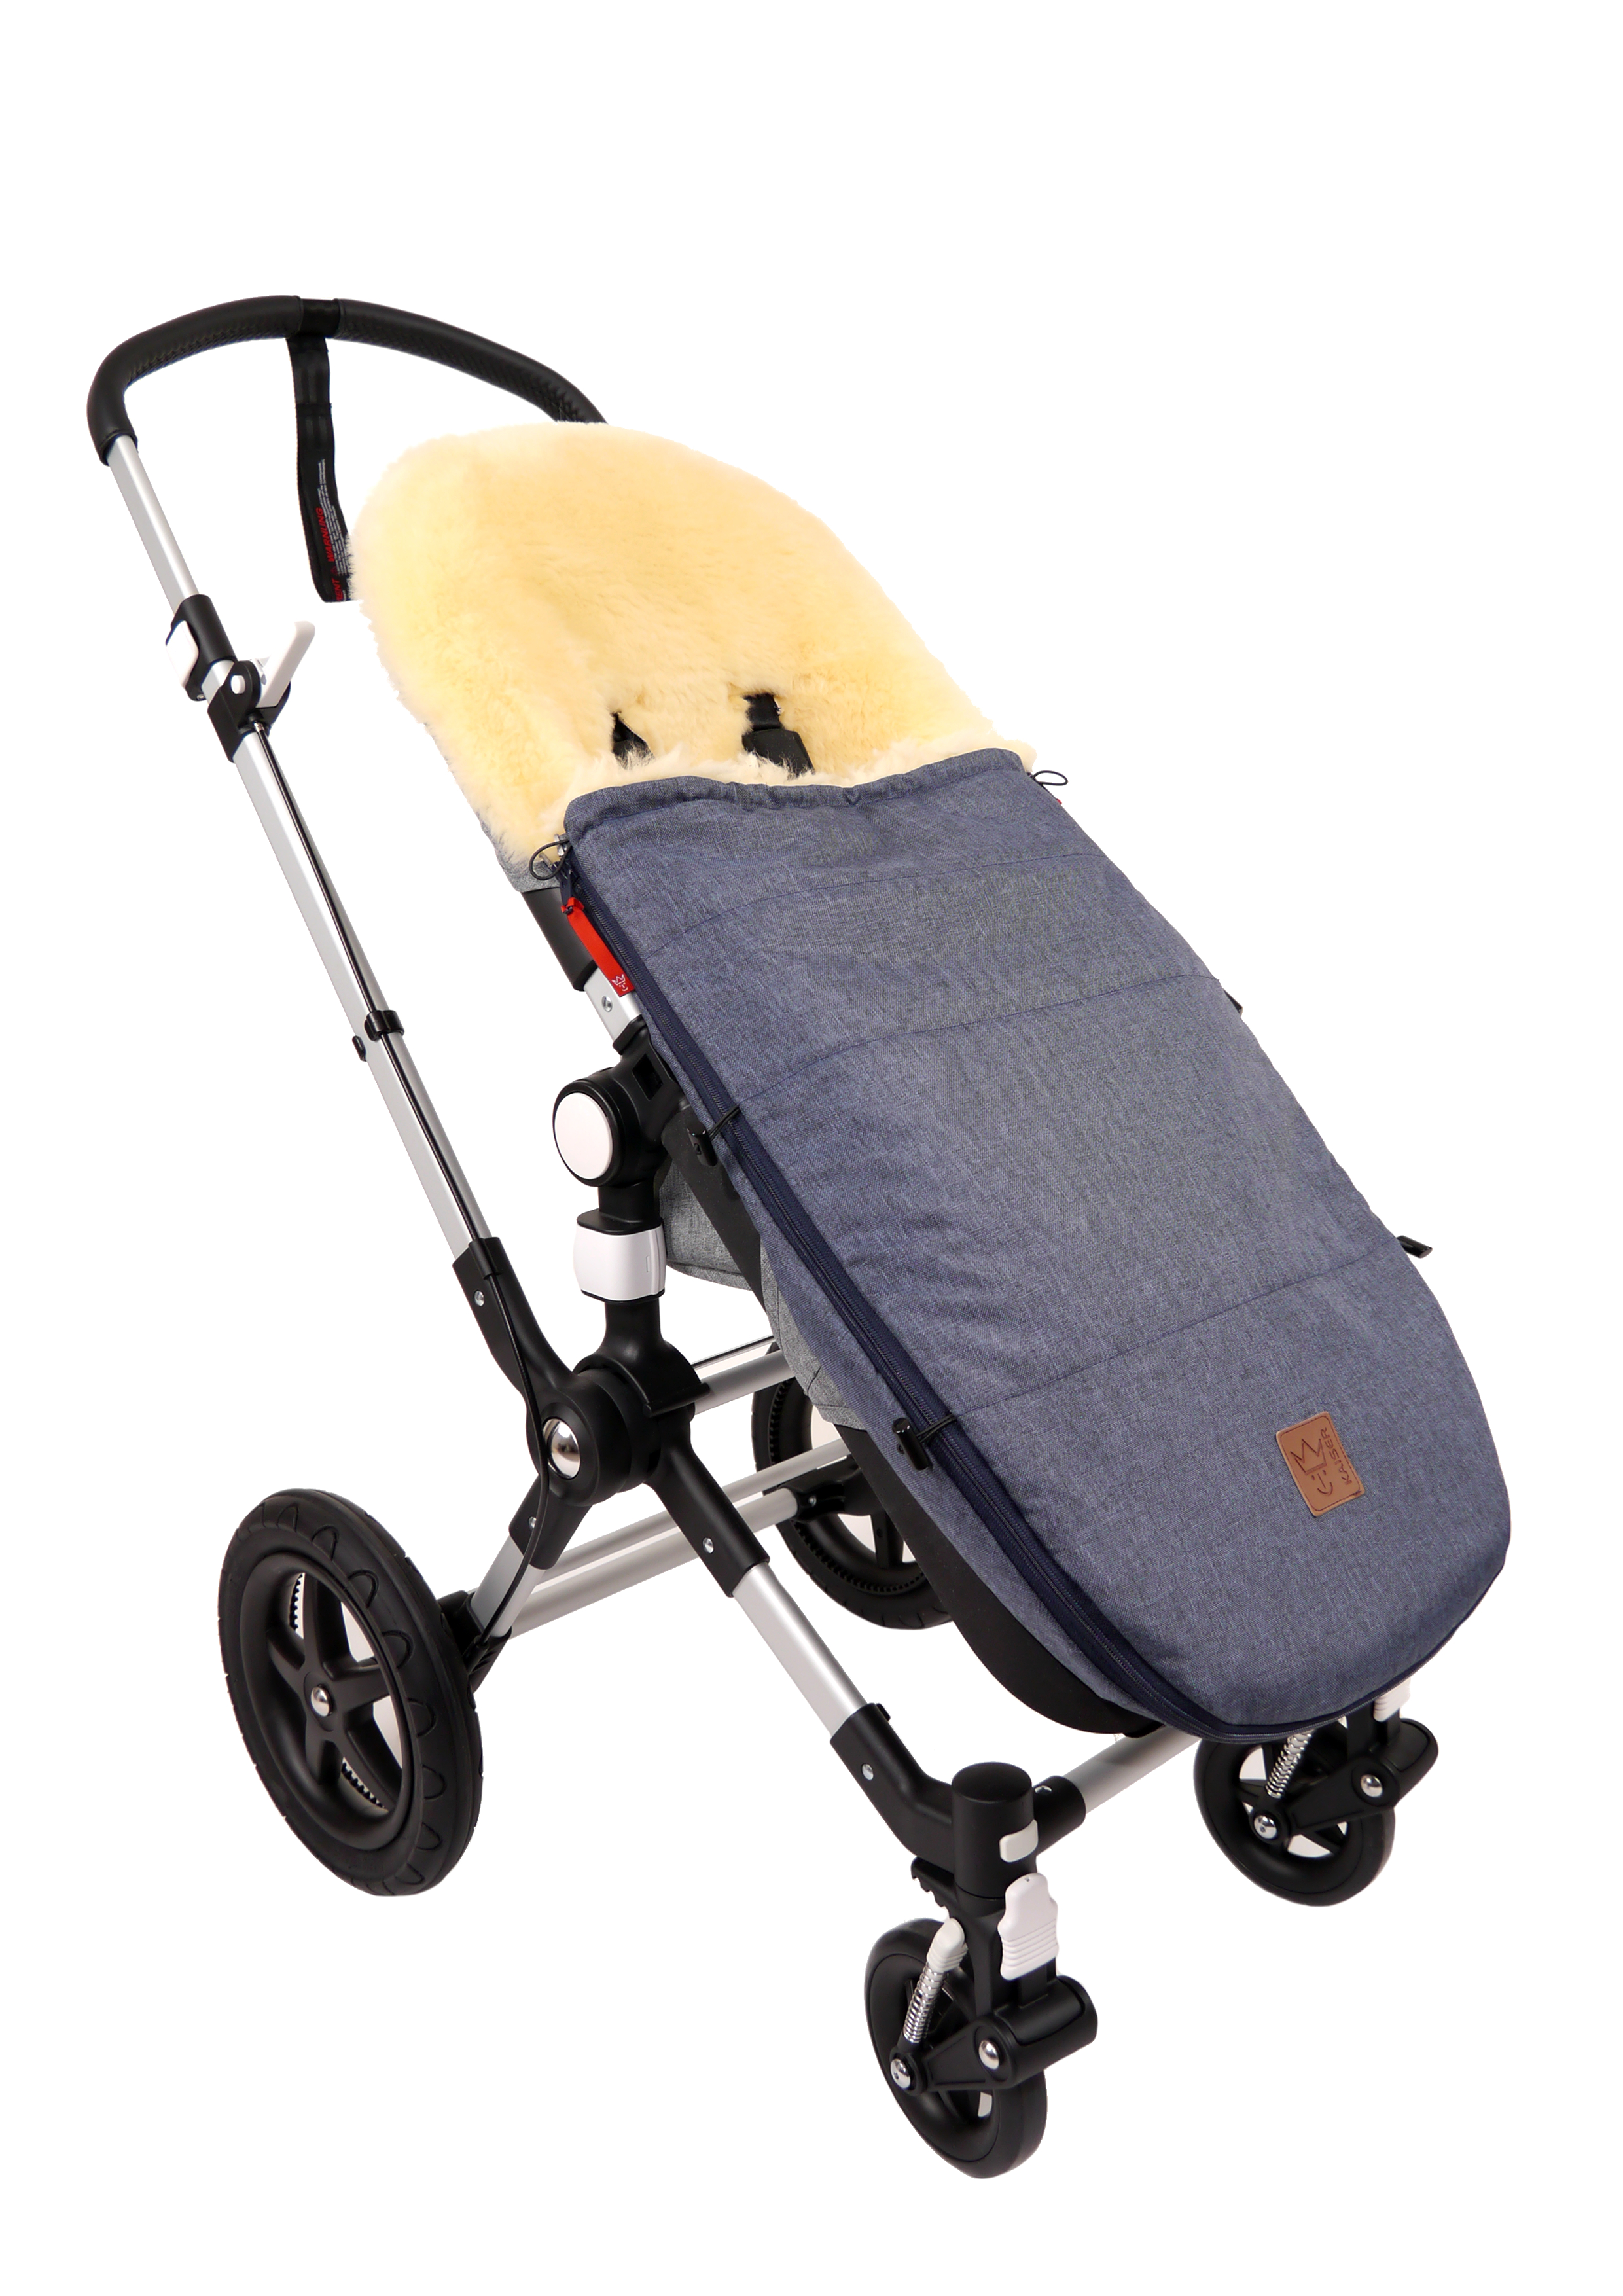 steelcraft agile 4 pram review